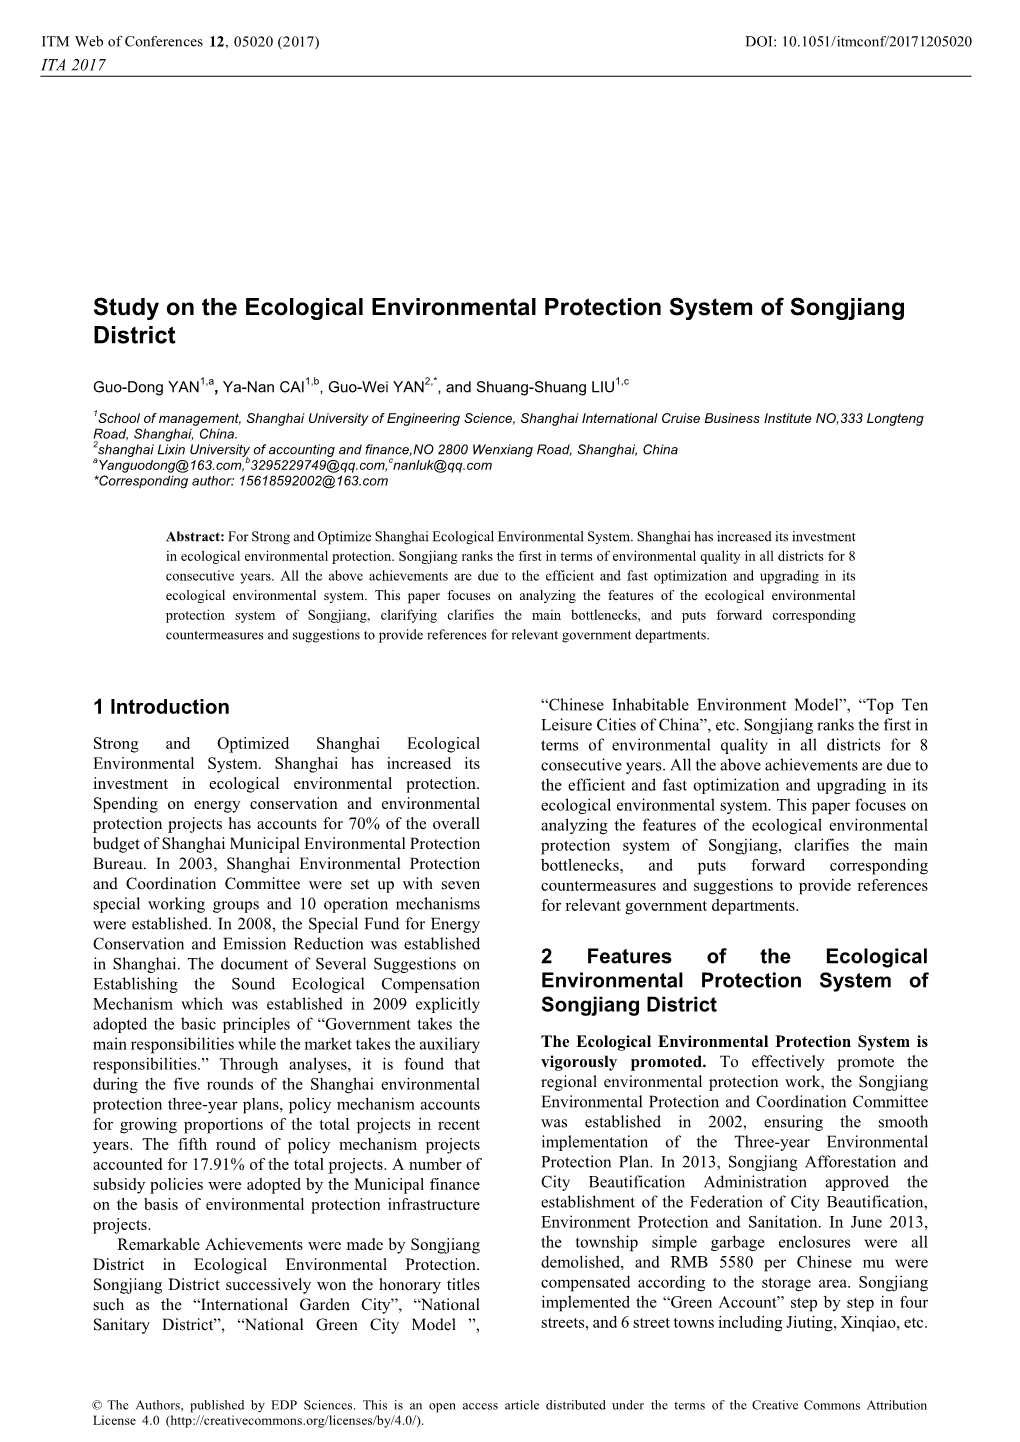 Study on the Ecological Environmental Protection System of Songjiang District